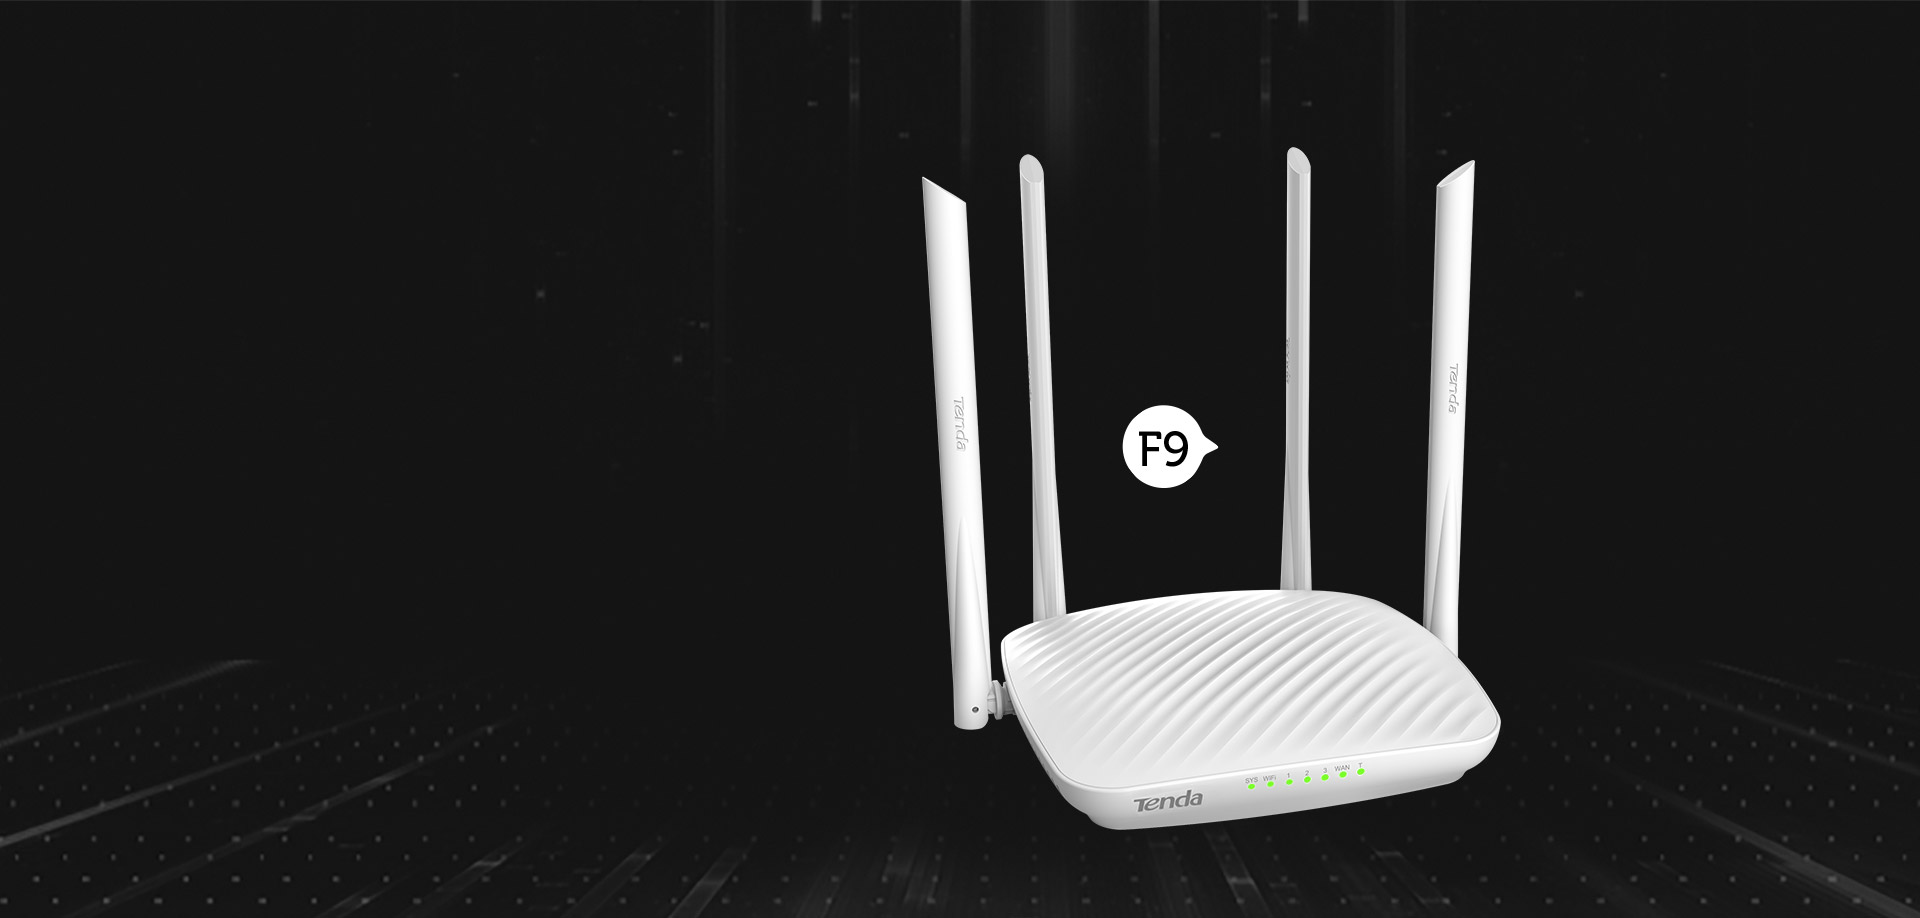 Tenda F9 Speed and coverage Wi-Fi router-Tenda US